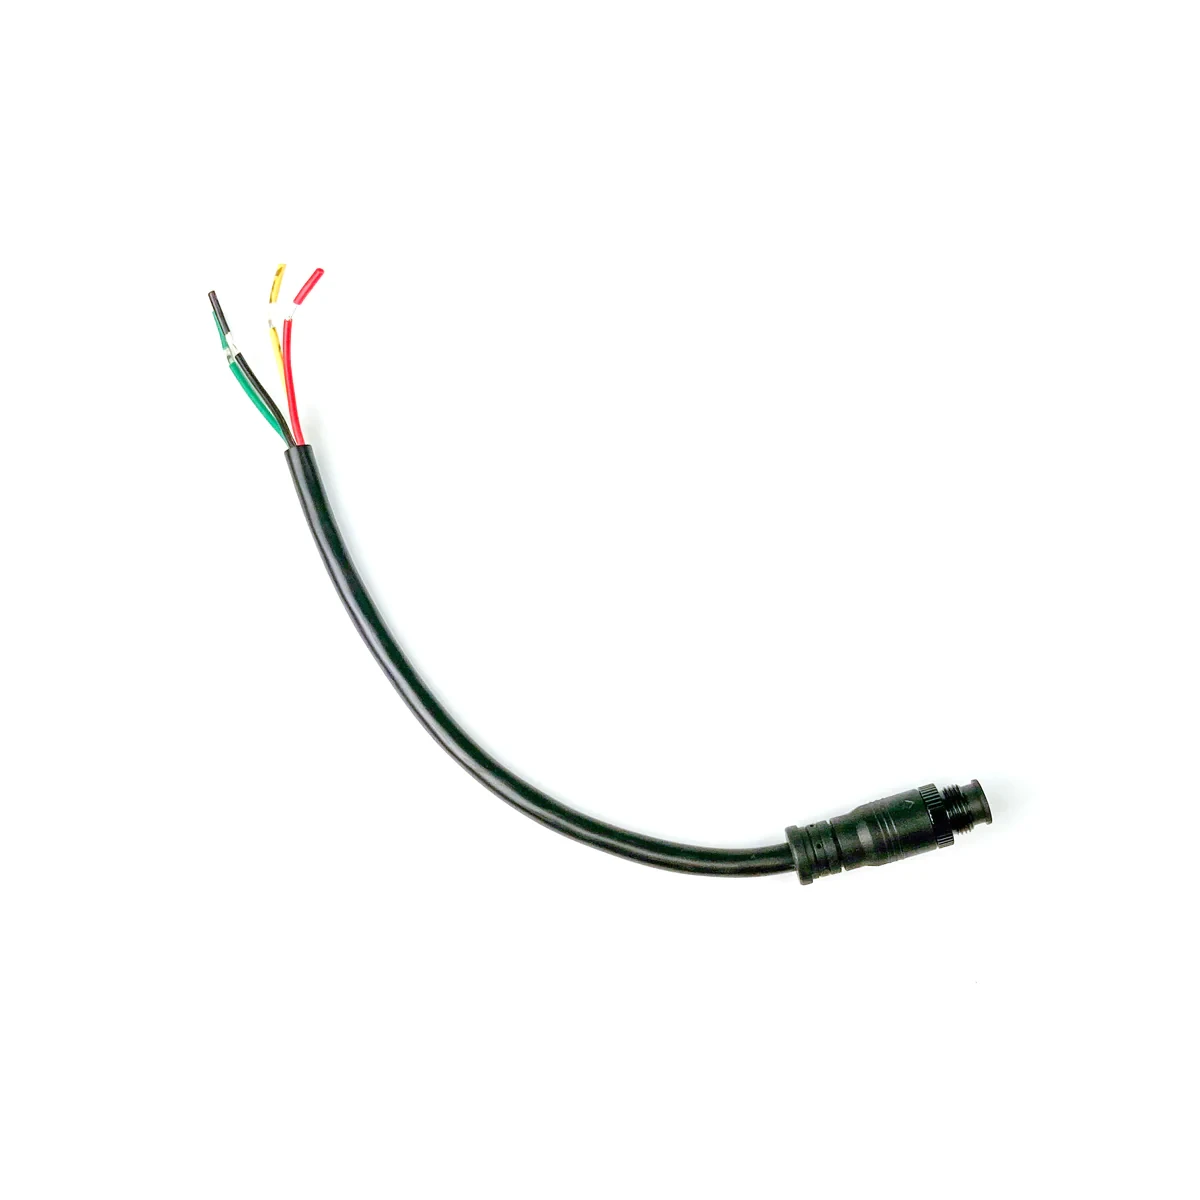 This connector is to be used with our Full Color LED Bistro Light.